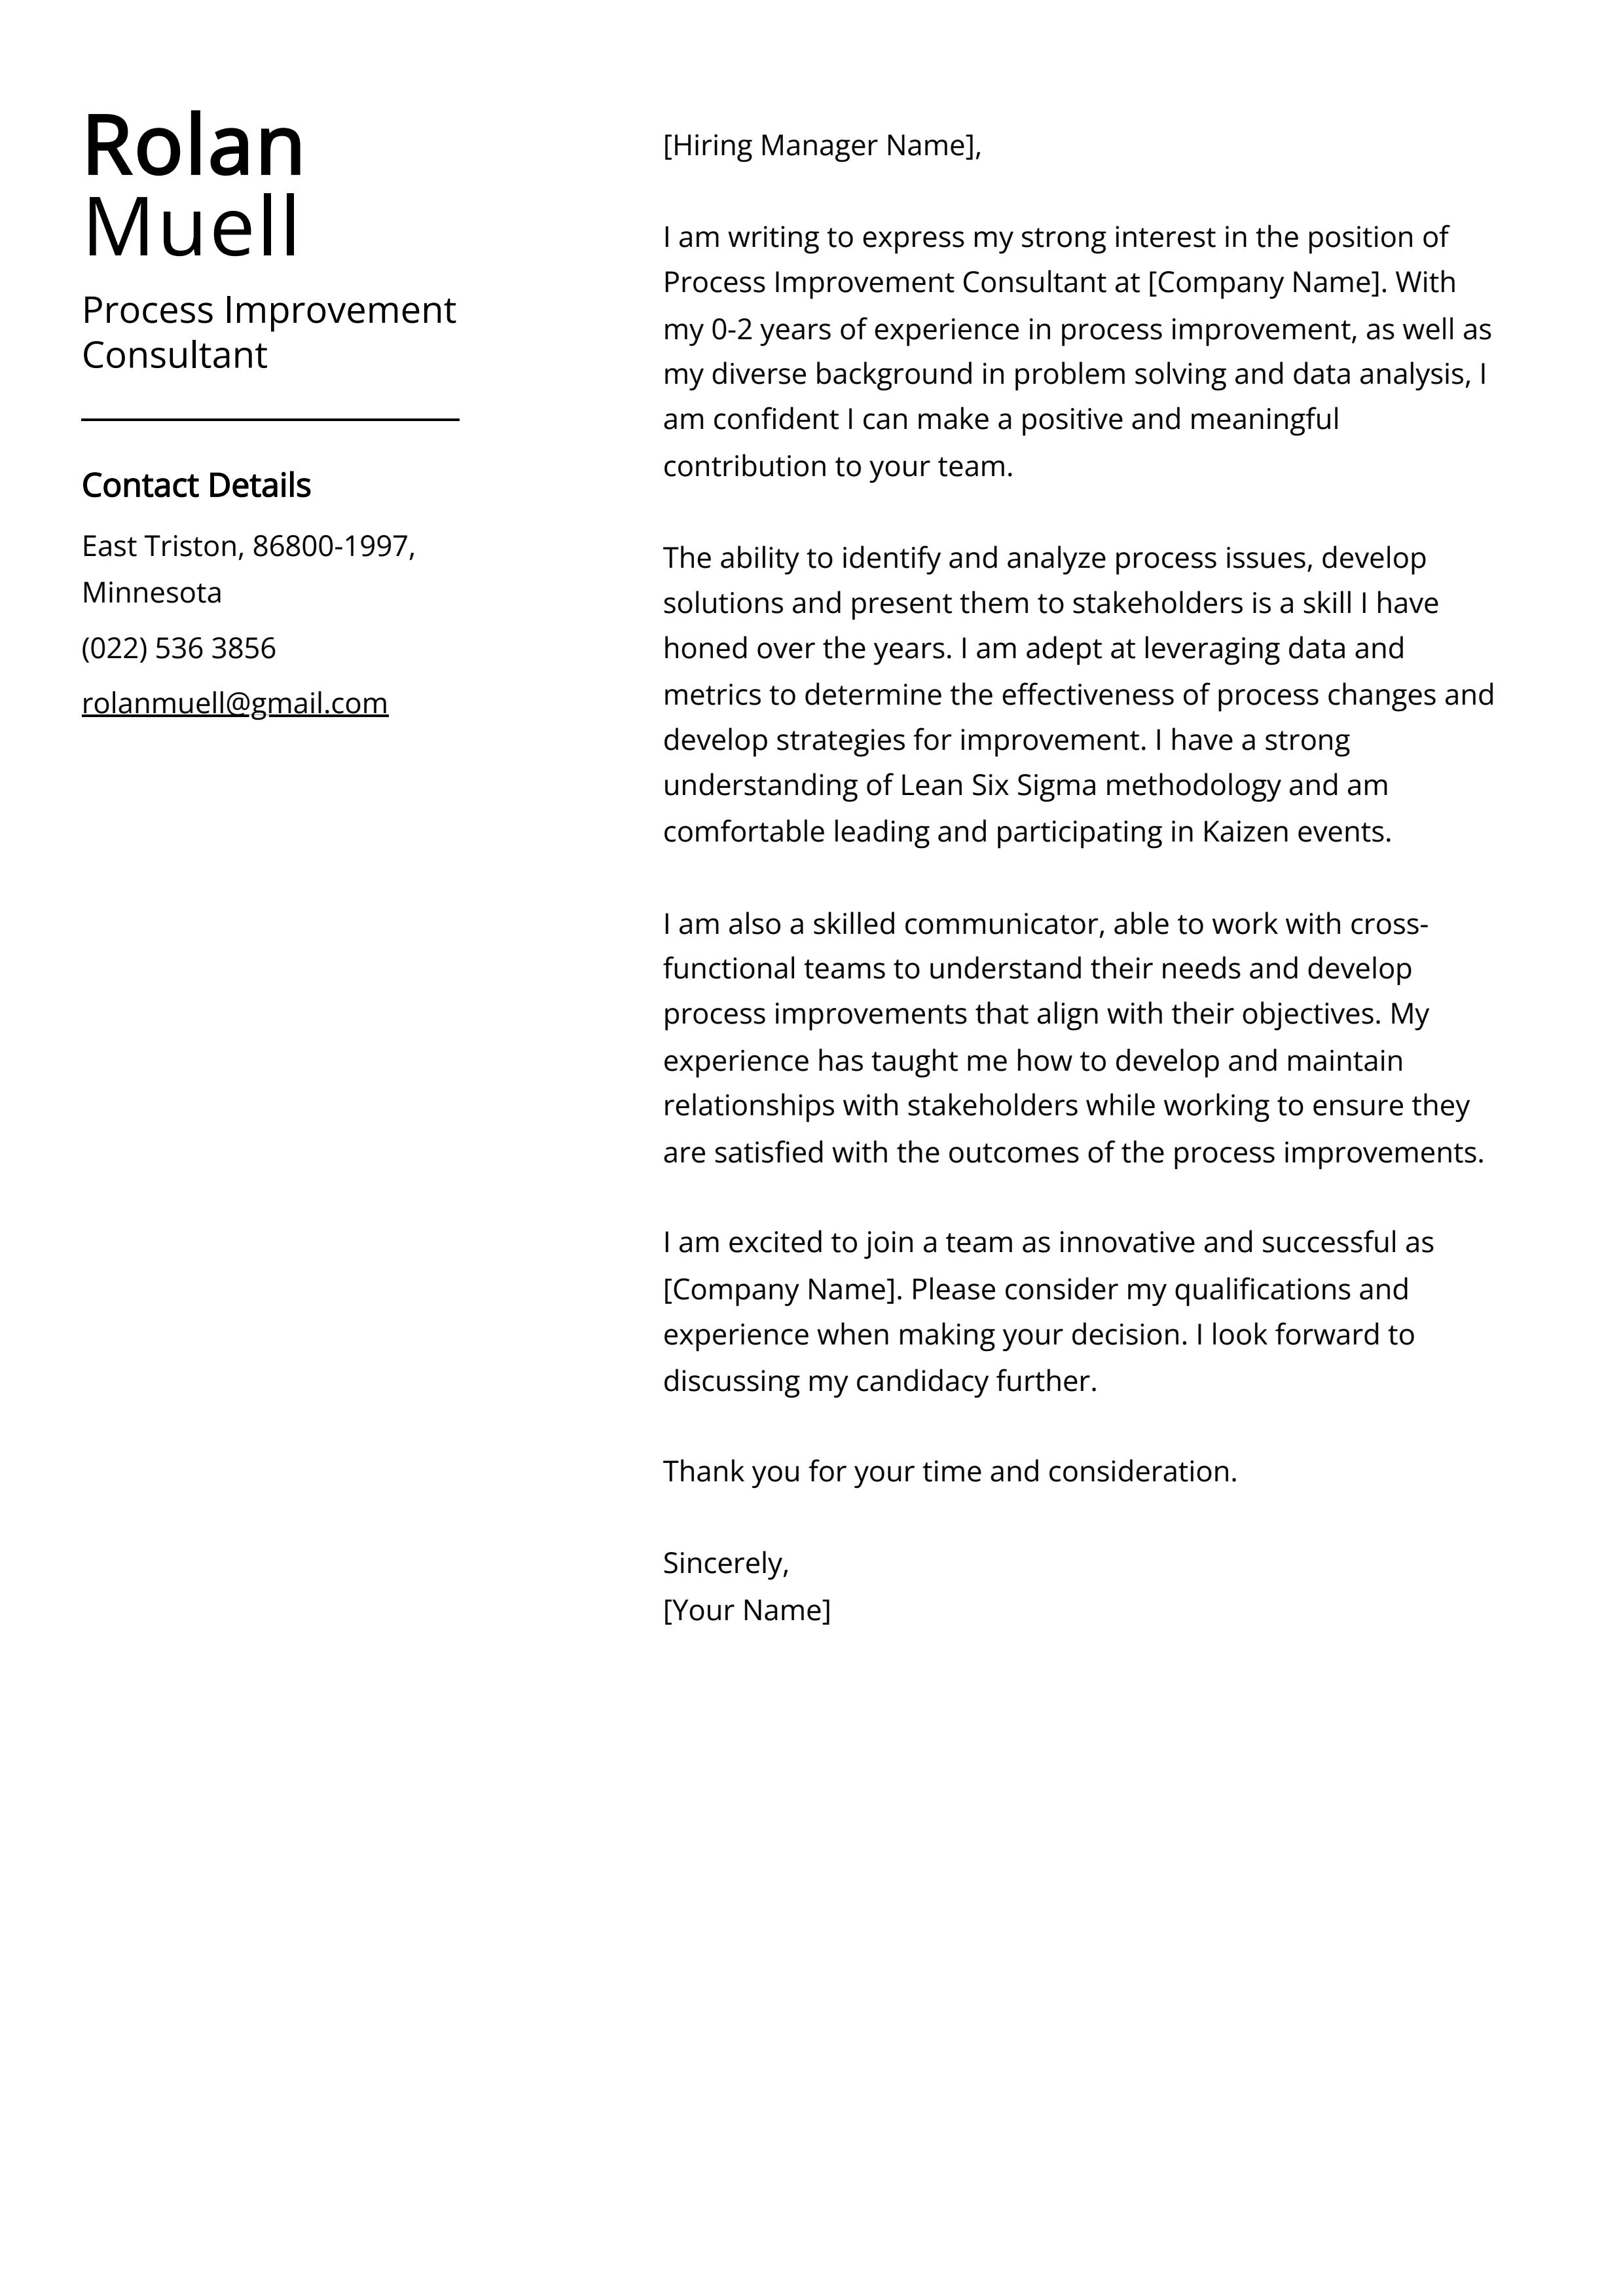 Process Improvement Consultant Cover Letter Example